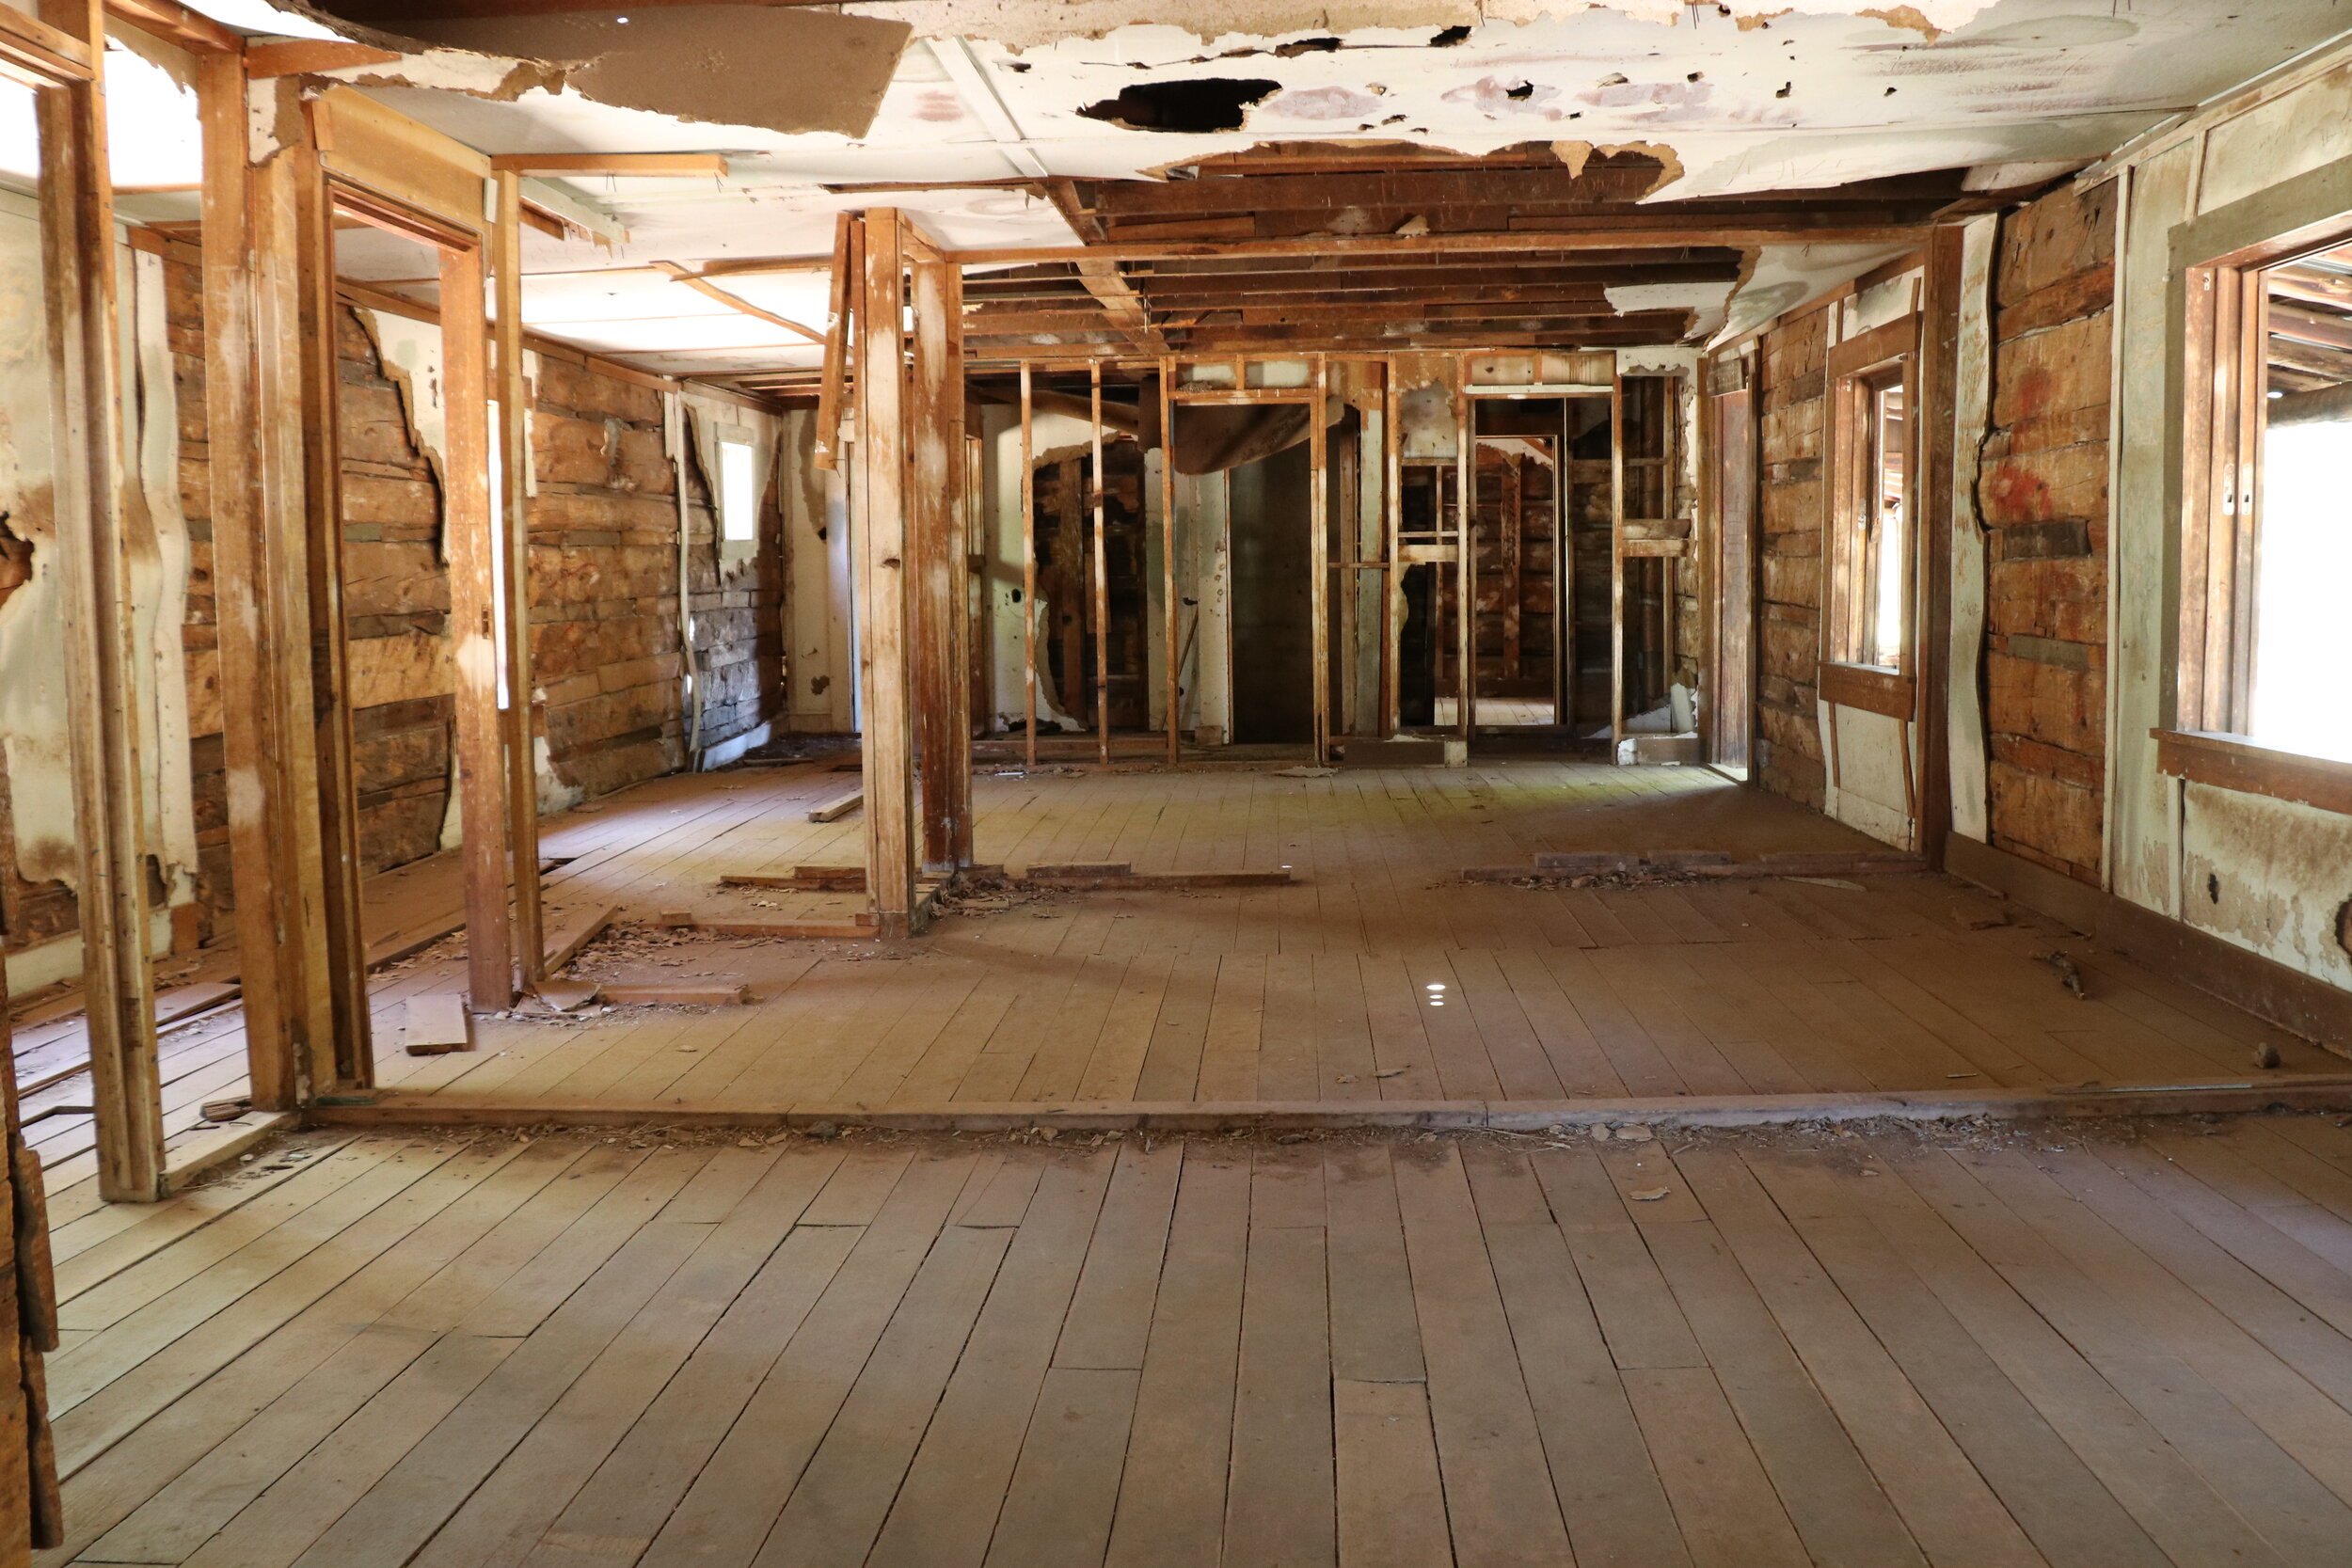 A few of the large rooms inside T-Bar Ranch.